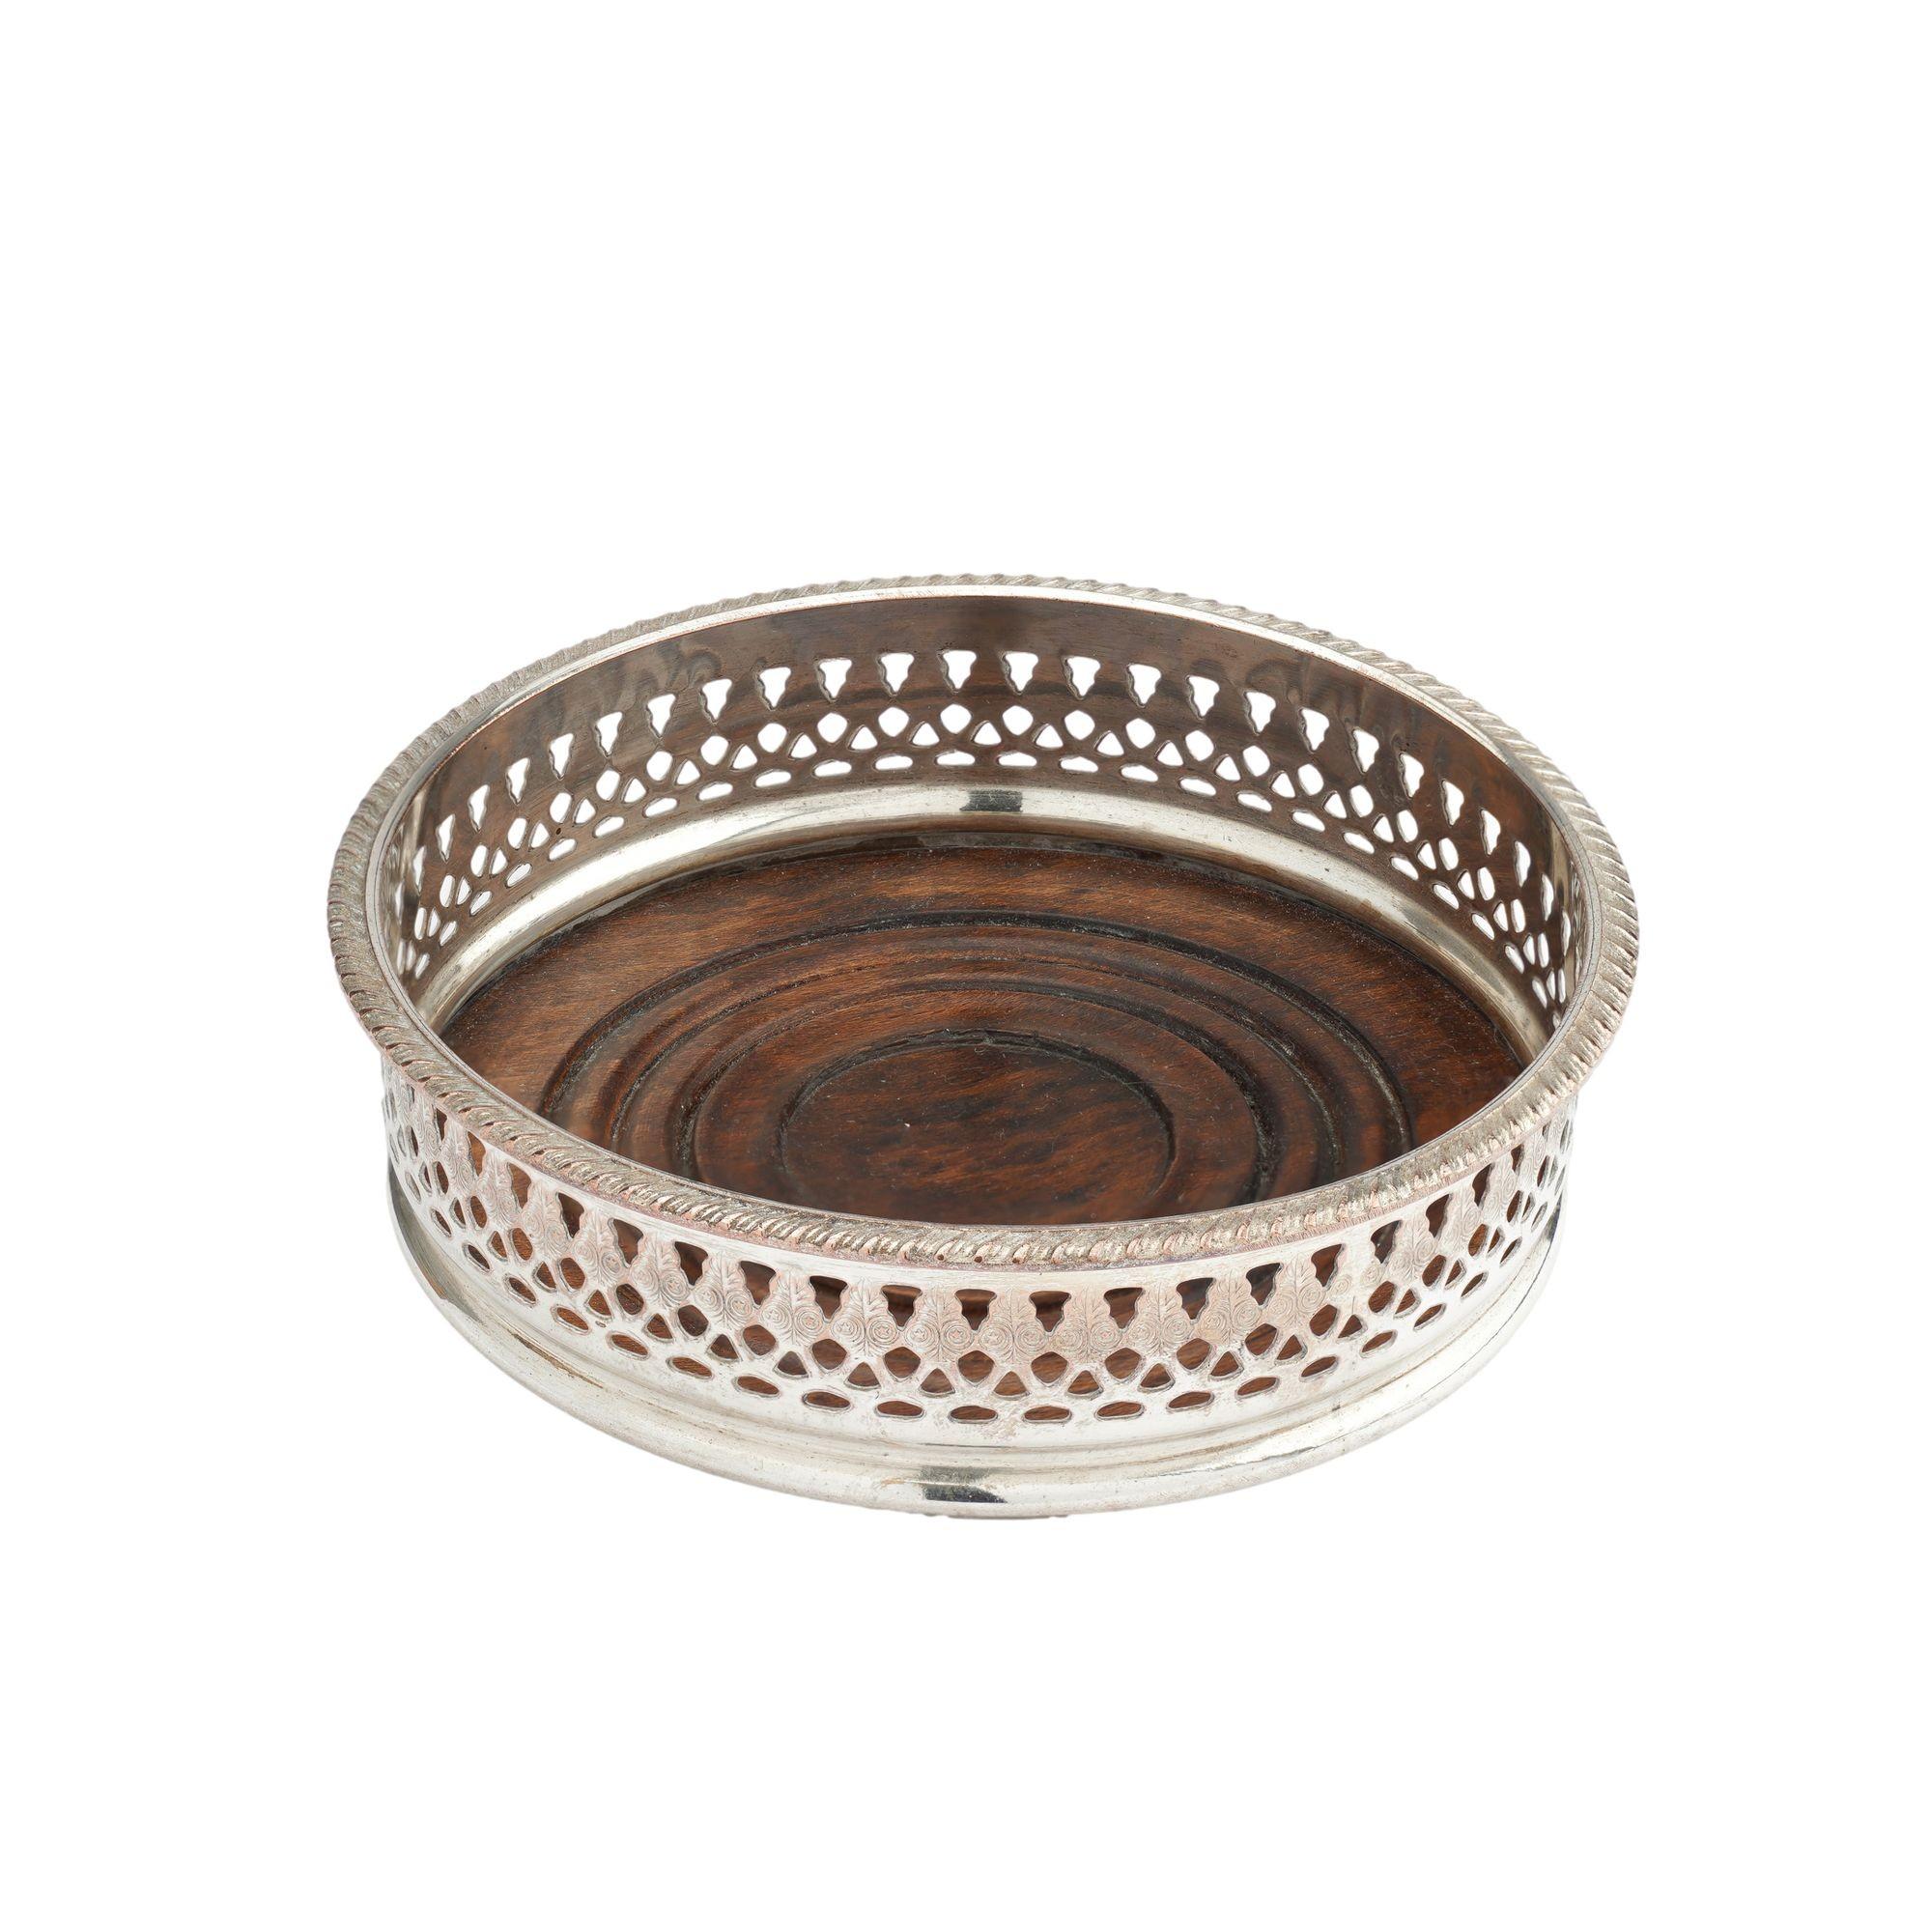 Sterling silver on copper Sheffield decanter coaster. The coaster is stamped with a Neoclassic anthemion decoration on the pierced gallery below a gadroon molding. A turned wood base is fitted to the bottom of the coaster.

Sheffield, England, circa